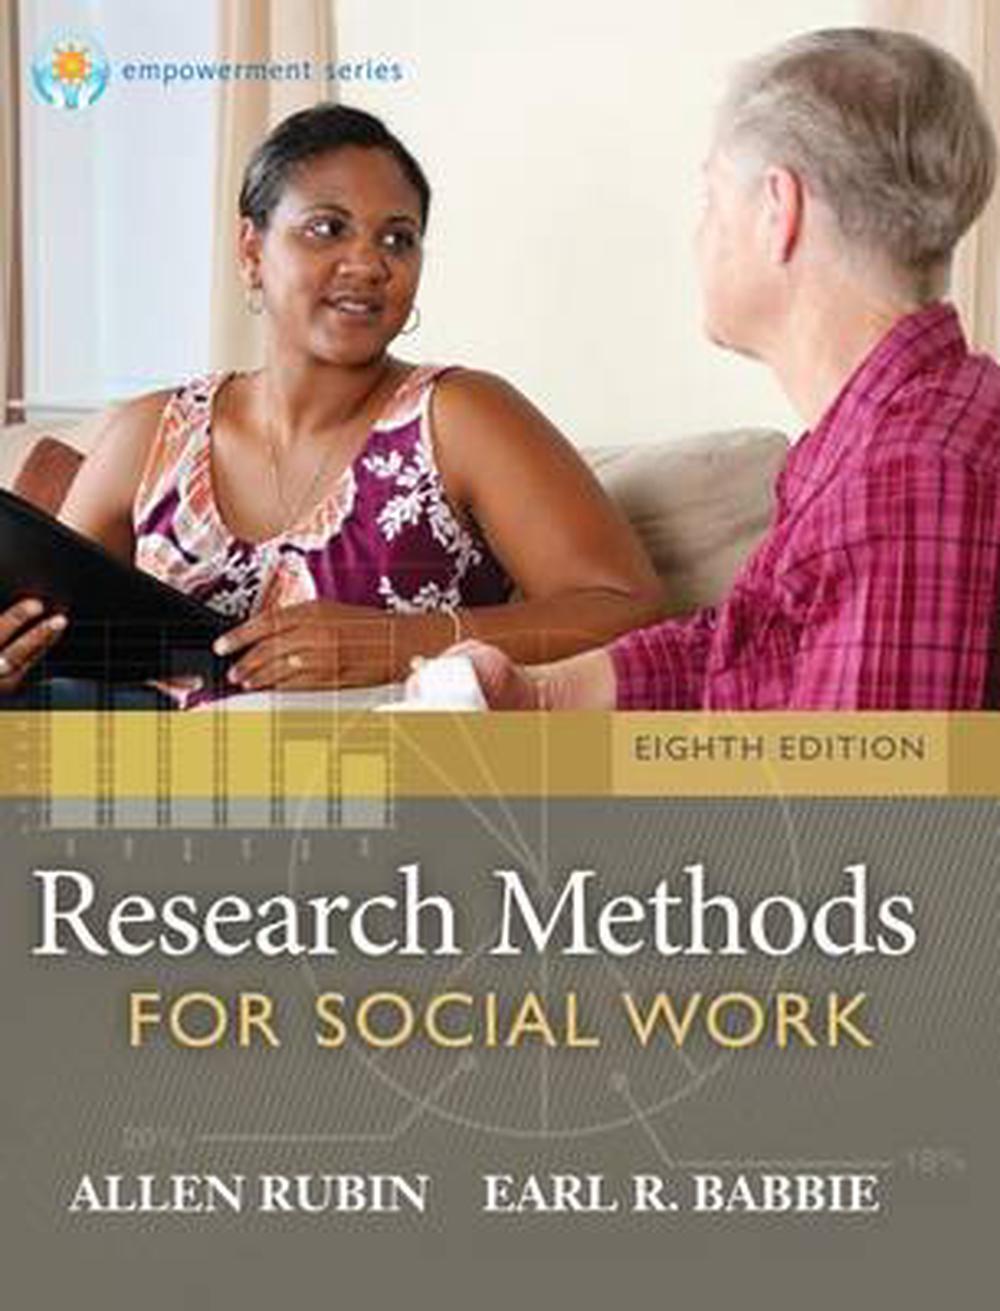 empowerment series research methods for social work 9th edition pdf